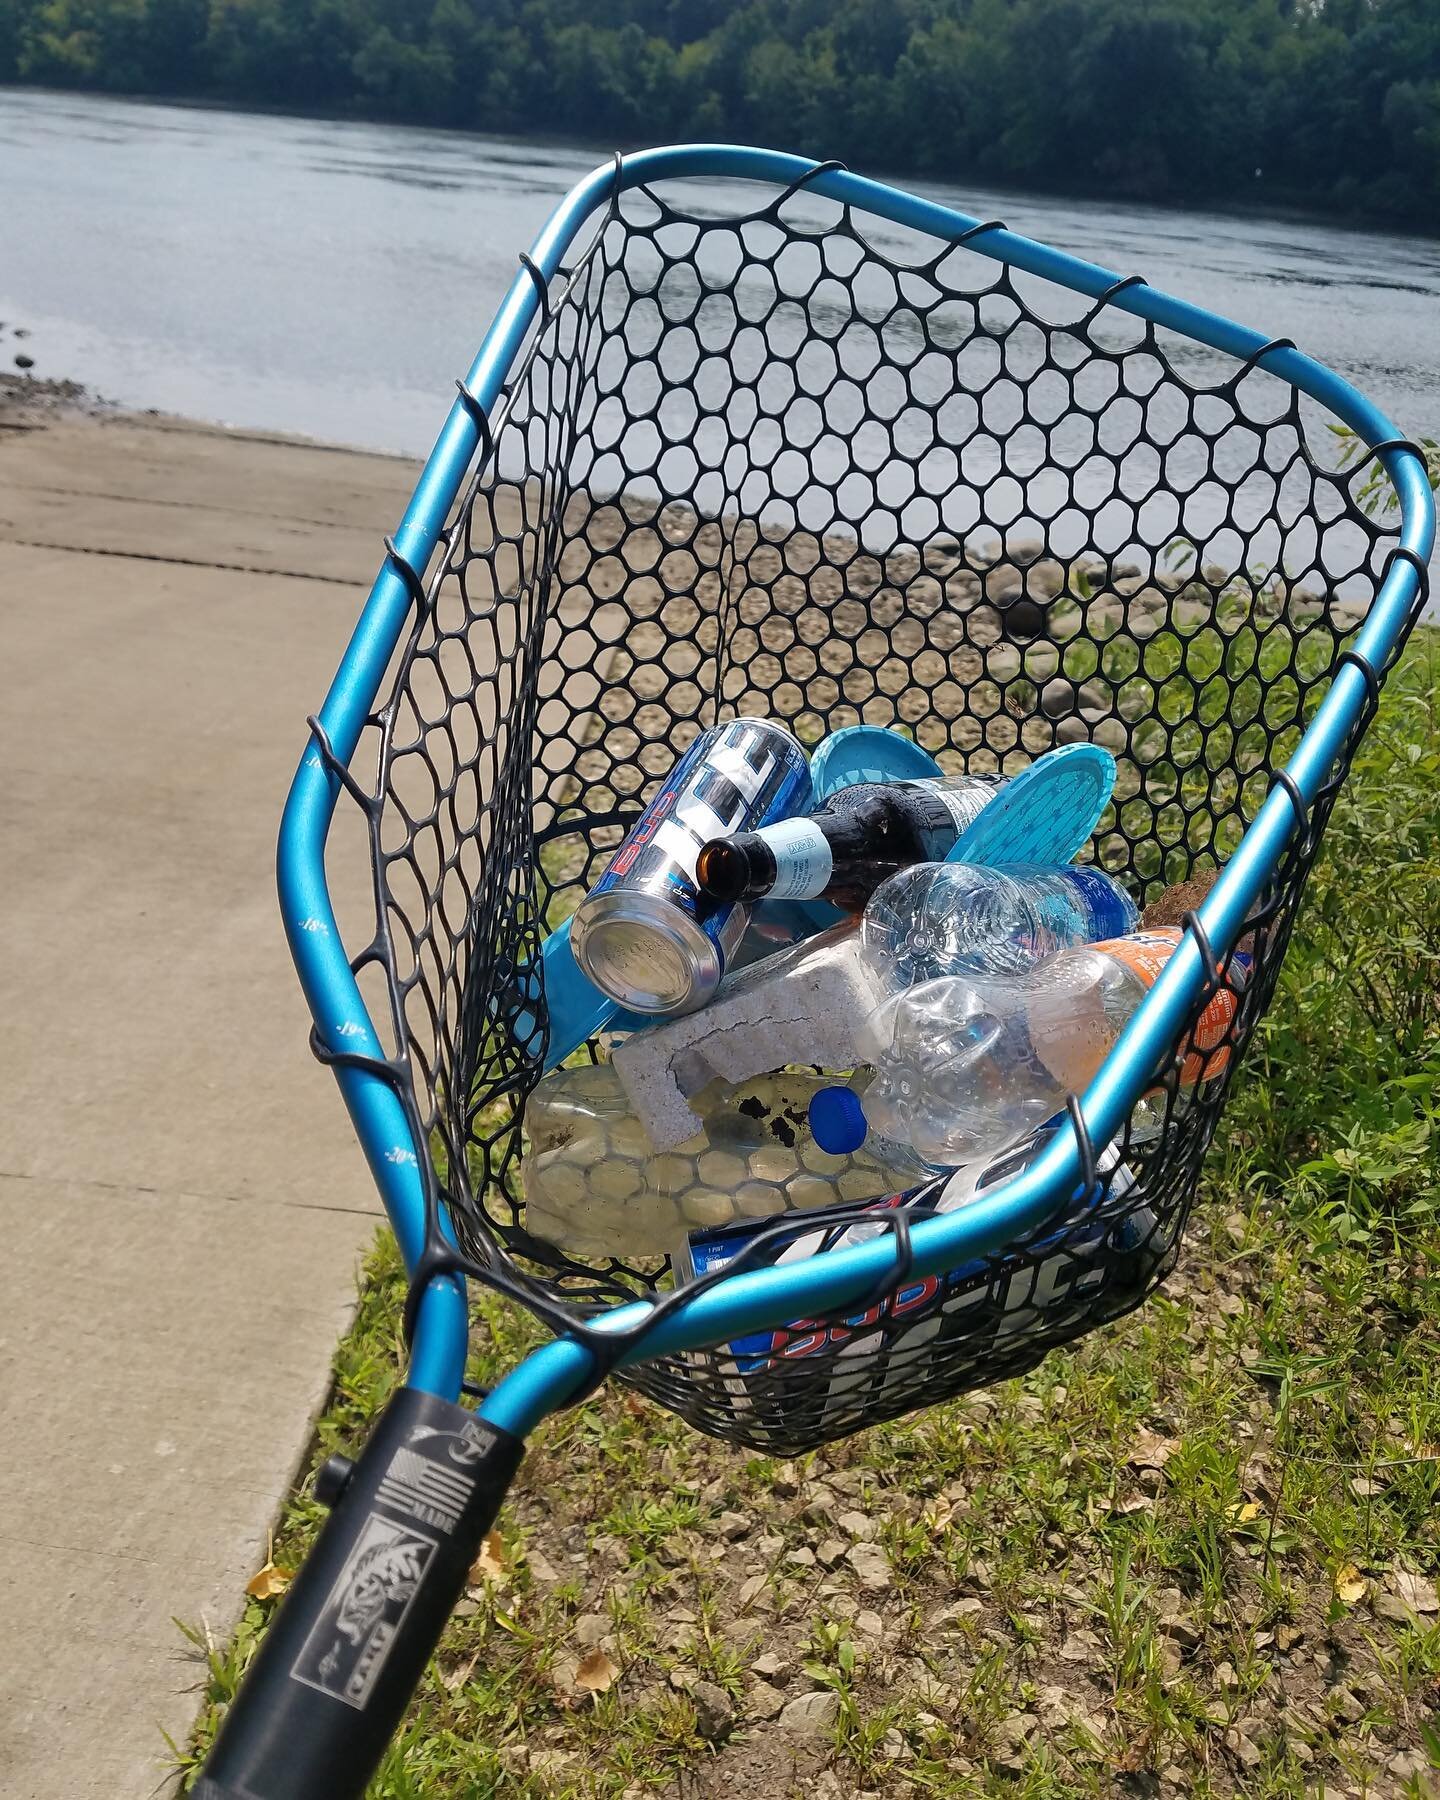 Getting out to fish this weekend? If ya do pick up some trash while yer at it.  We&rsquo;ll select 2 people at random to win something cool.

1. Go outside to fly fish.
2. Pick up trash.
3. Post a photo of your trashy net and tag us.
4. 2 random winn